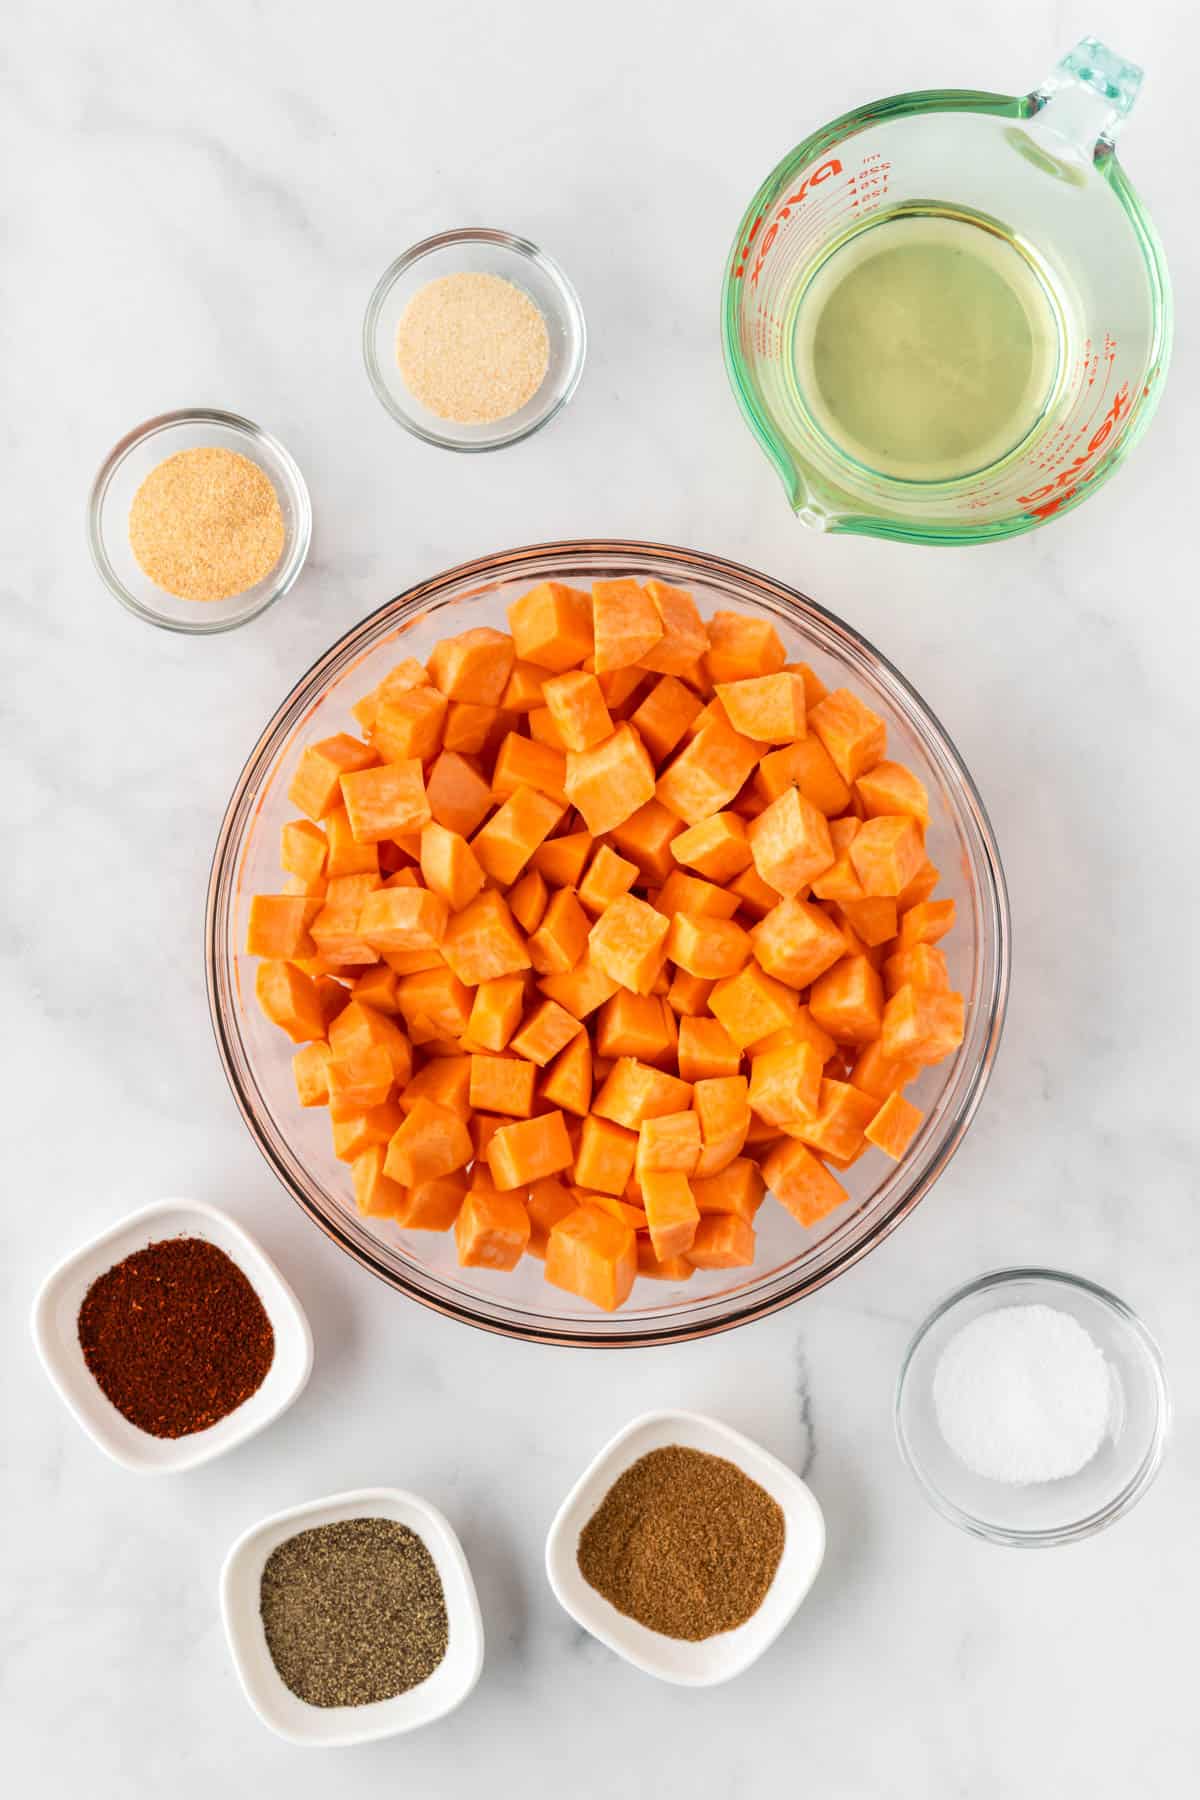 diced sweet potatoes in a bowl surrounded by oil and spices